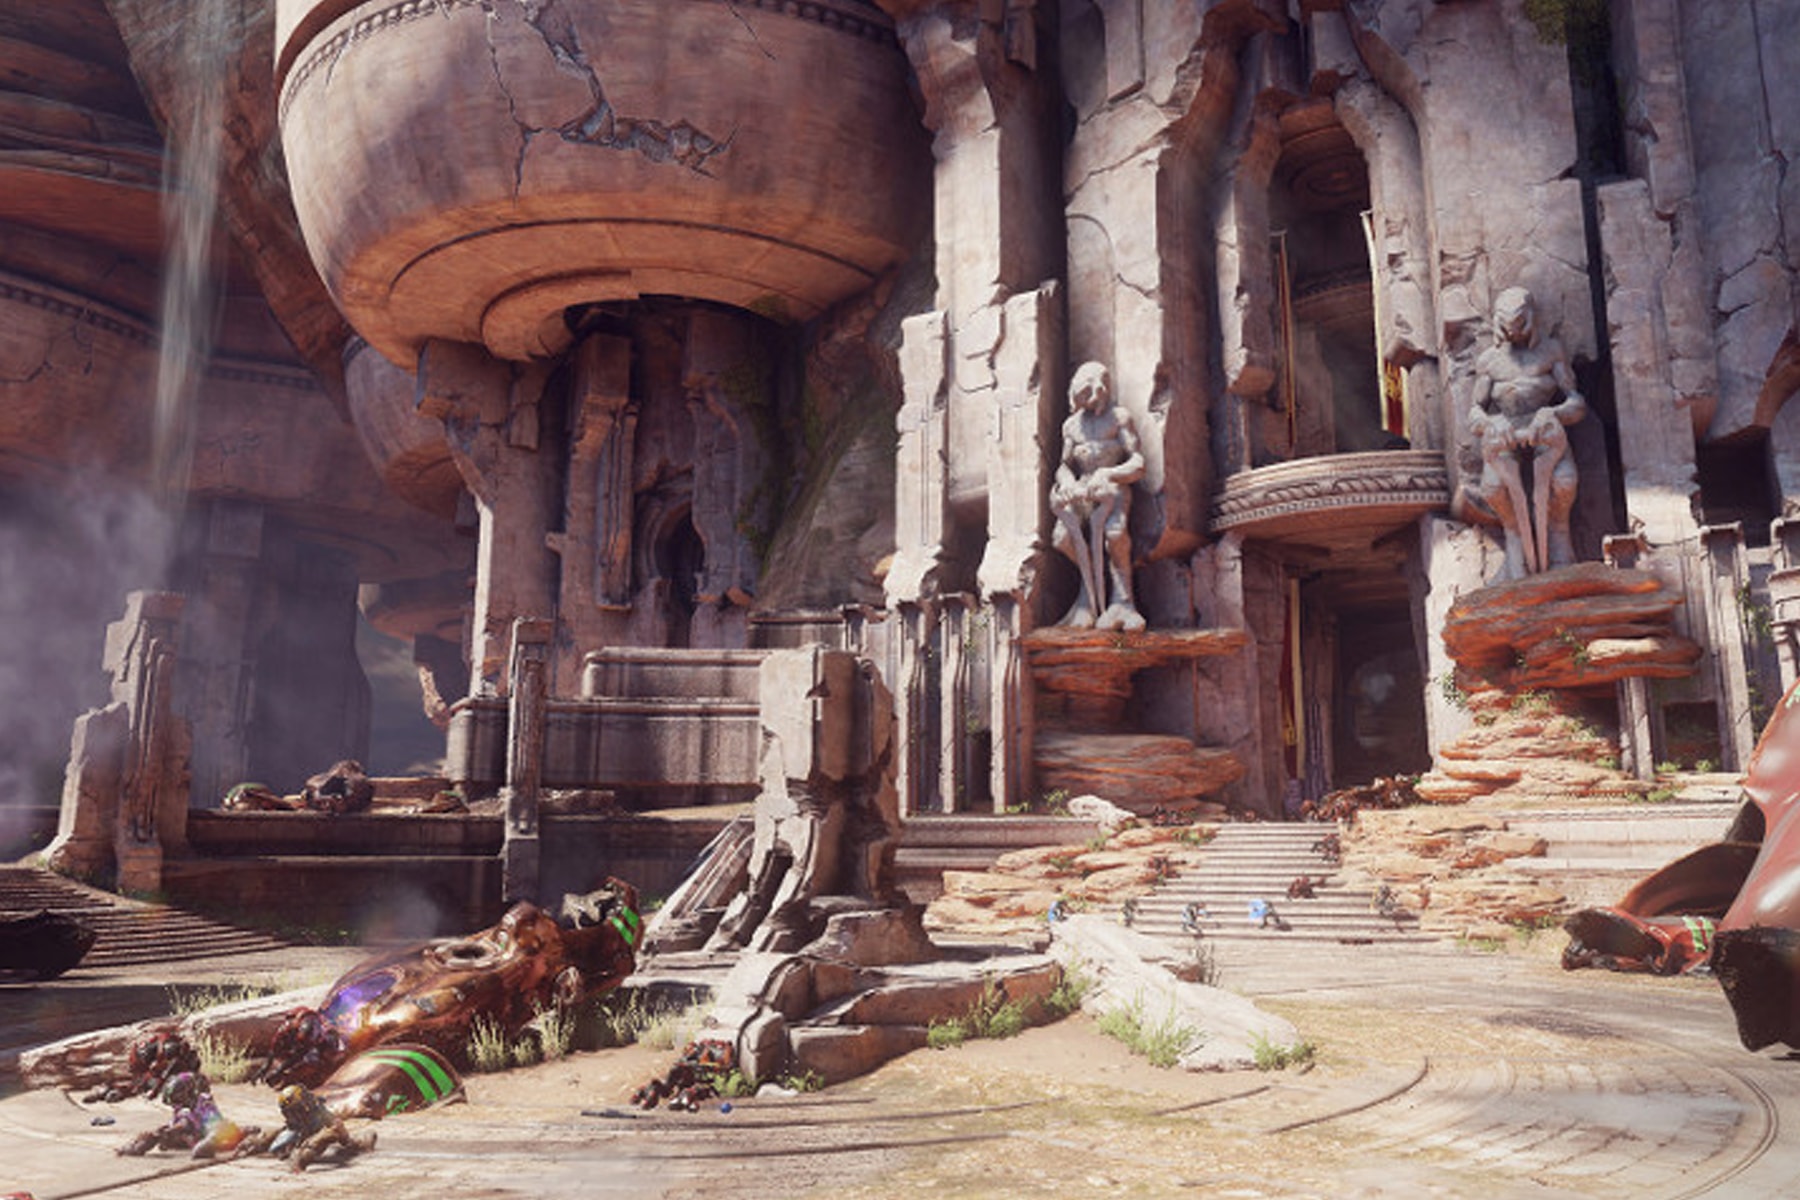 Illustration of the Unforgotten Temples in Halo 5